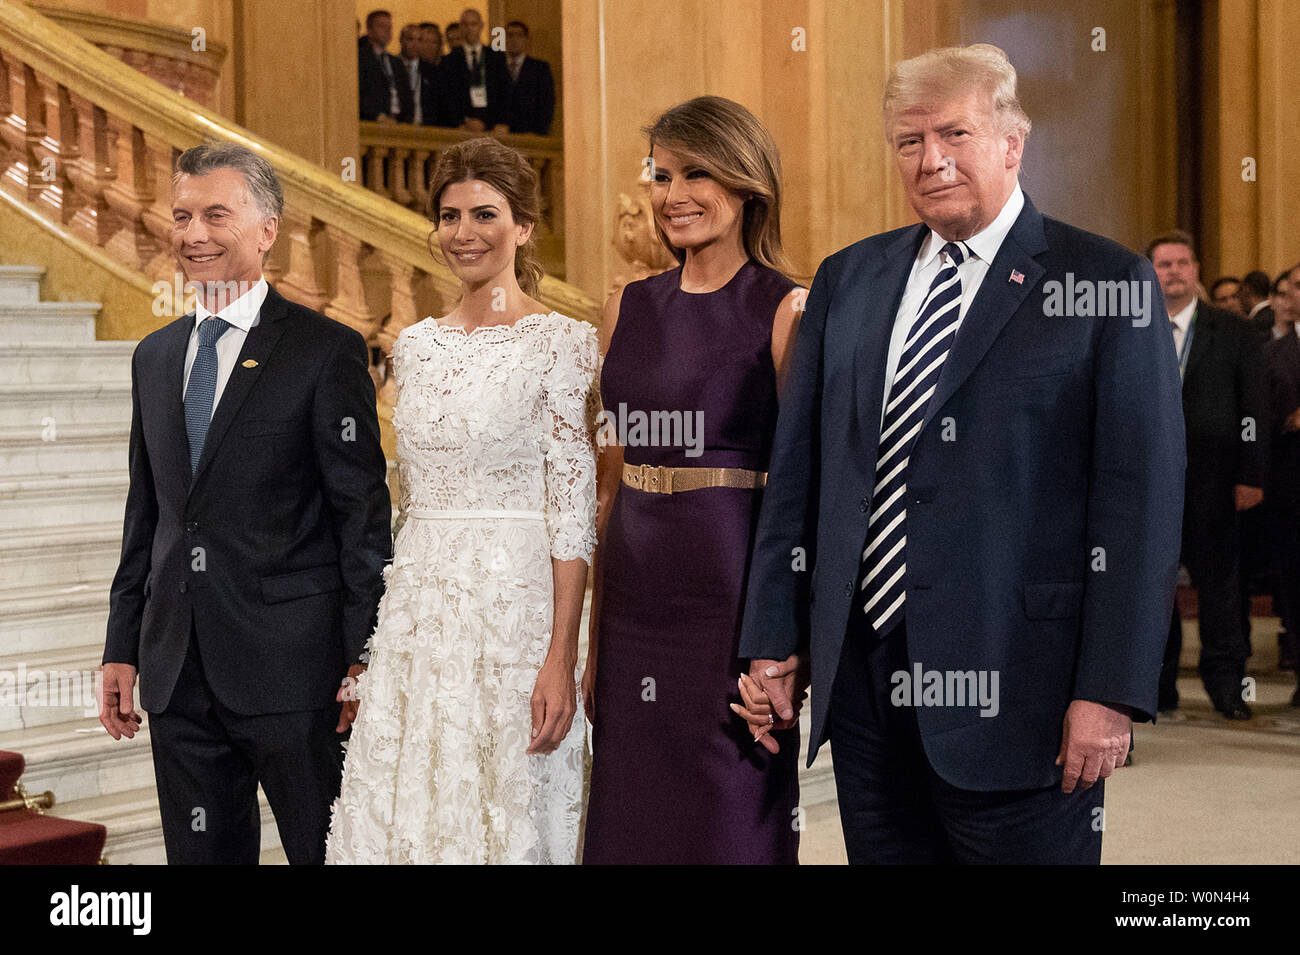 President Donald J. Trump and First Lady Melania Trump are greeted by  Argentine President Mauricio Macri and First Lady Juliana Awada upon their  arrival on November 30, 2018, at the Teatro Colon